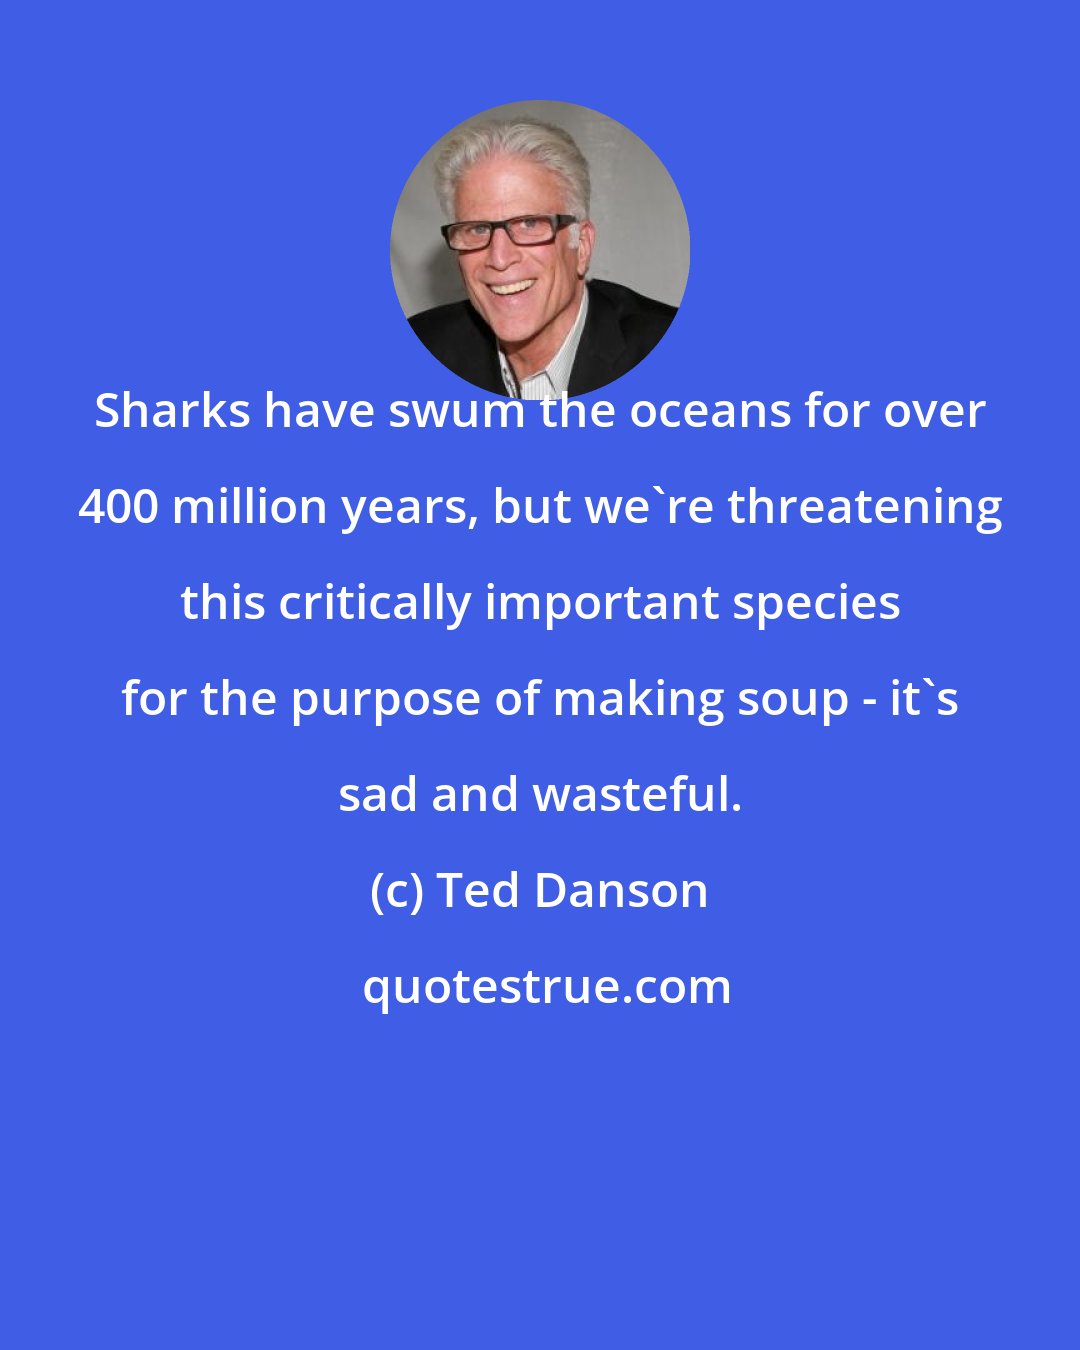 Ted Danson: Sharks have swum the oceans for over 400 million years, but we're threatening this critically important species for the purpose of making soup - it's sad and wasteful.